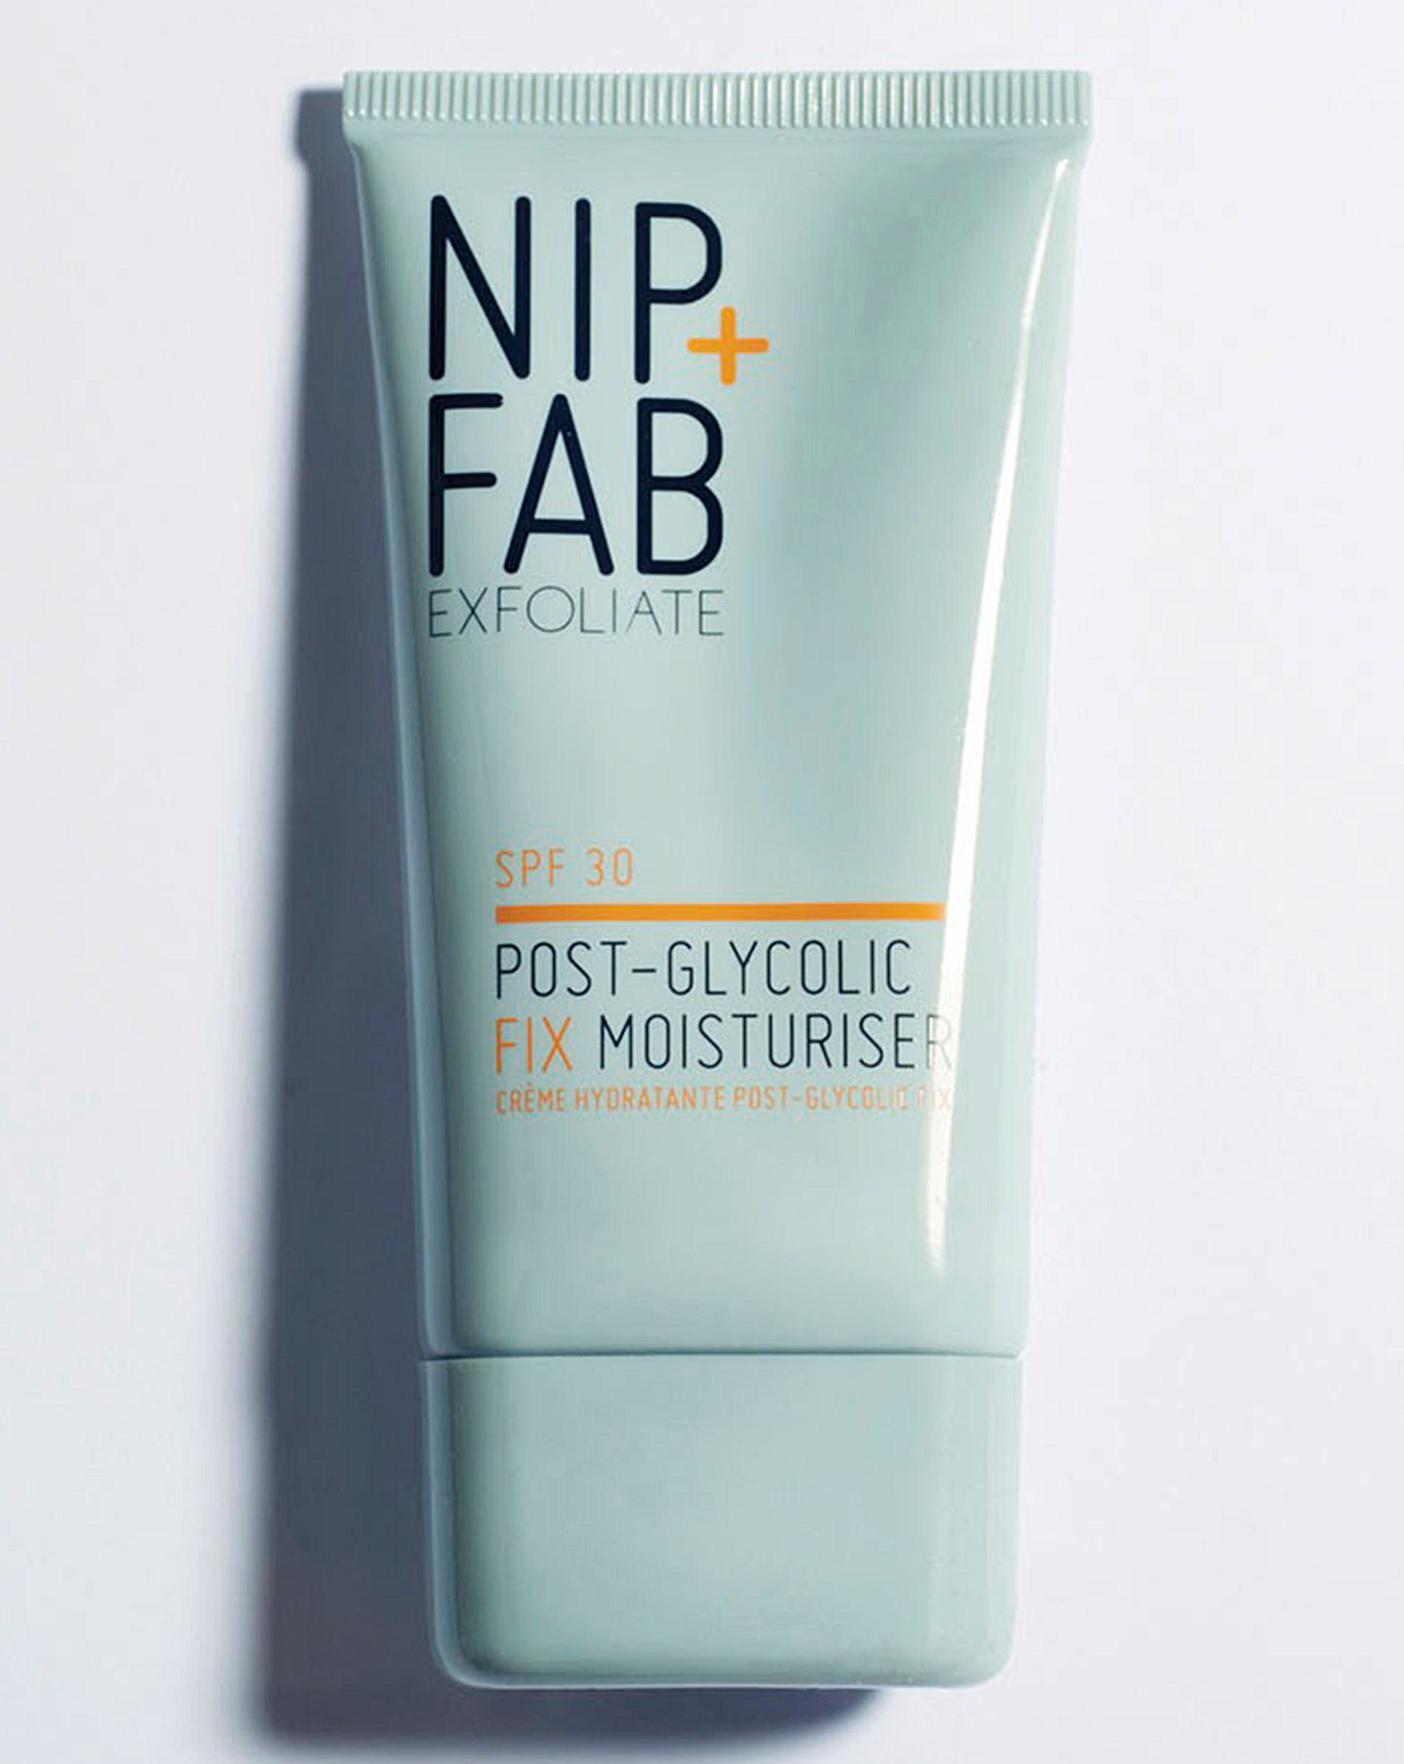 And offers nip fab 